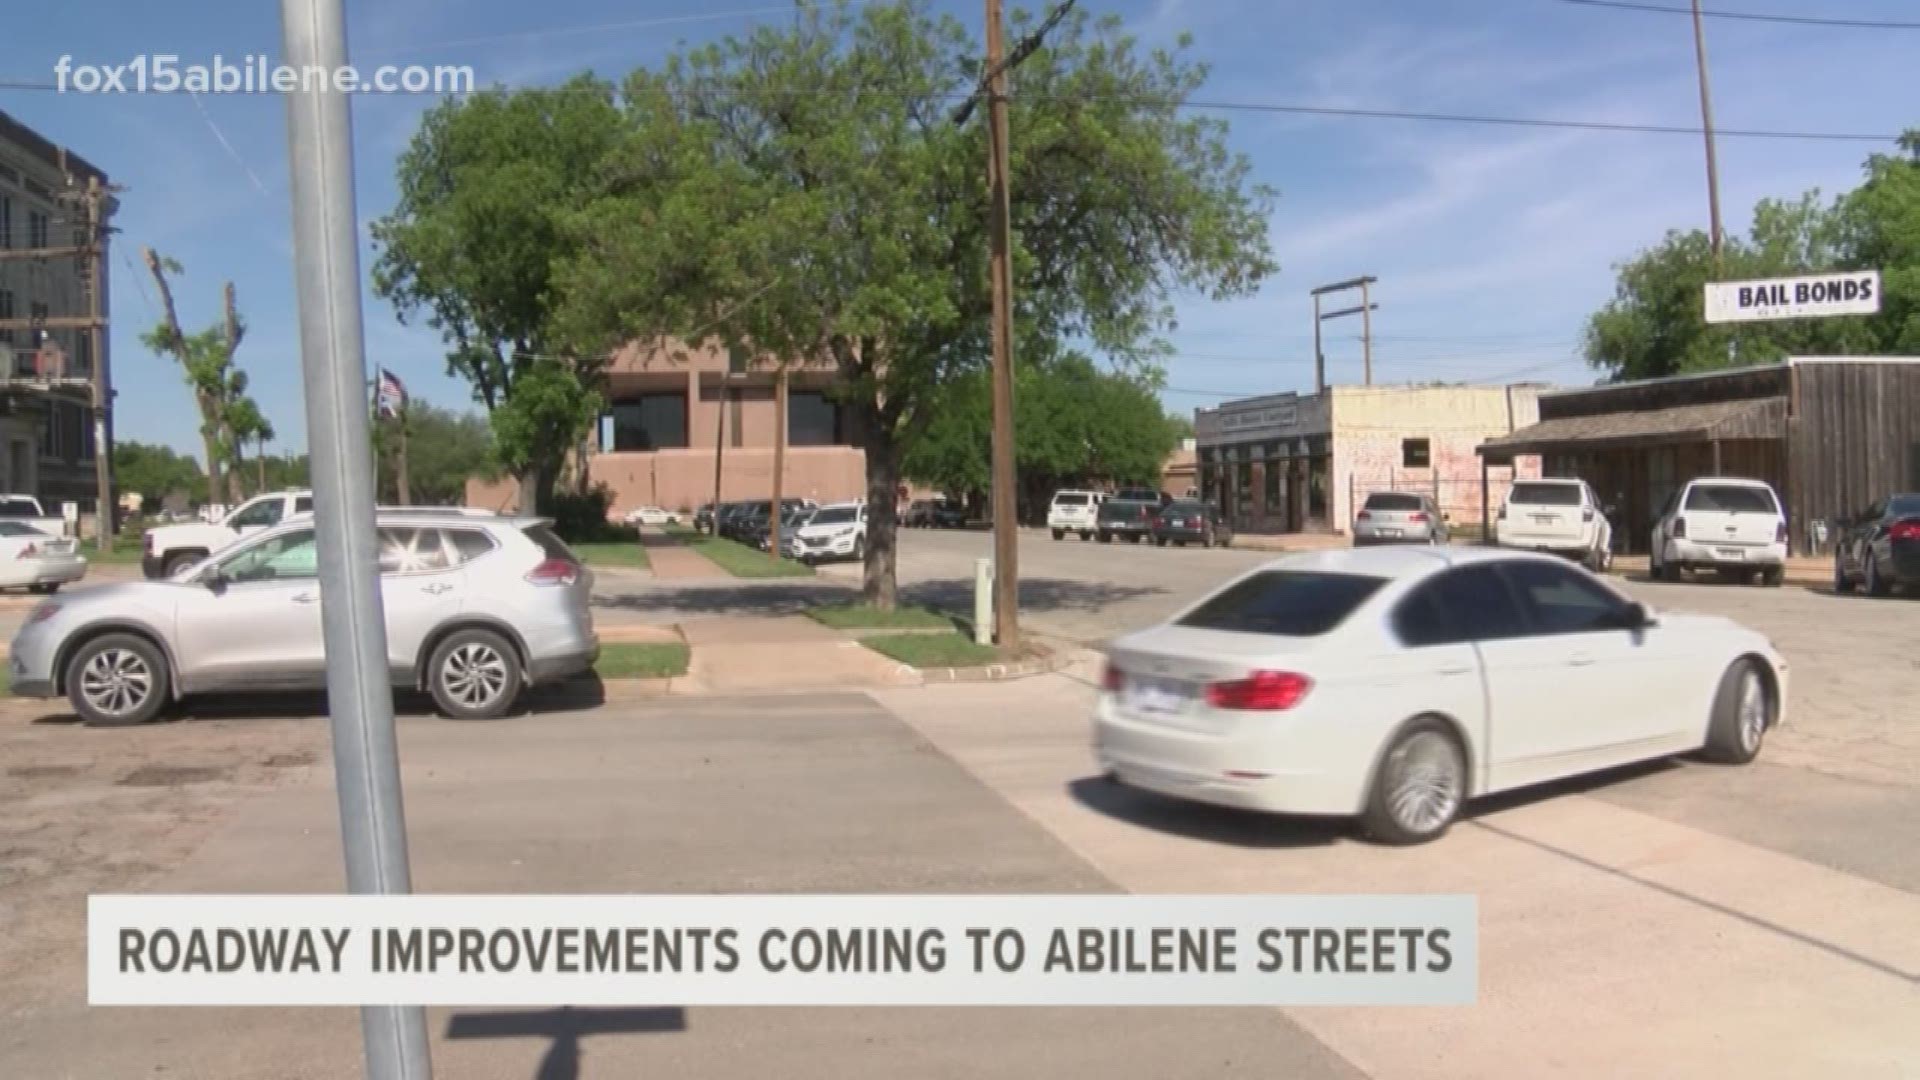 Roadway improvements coming to Abilene streets.